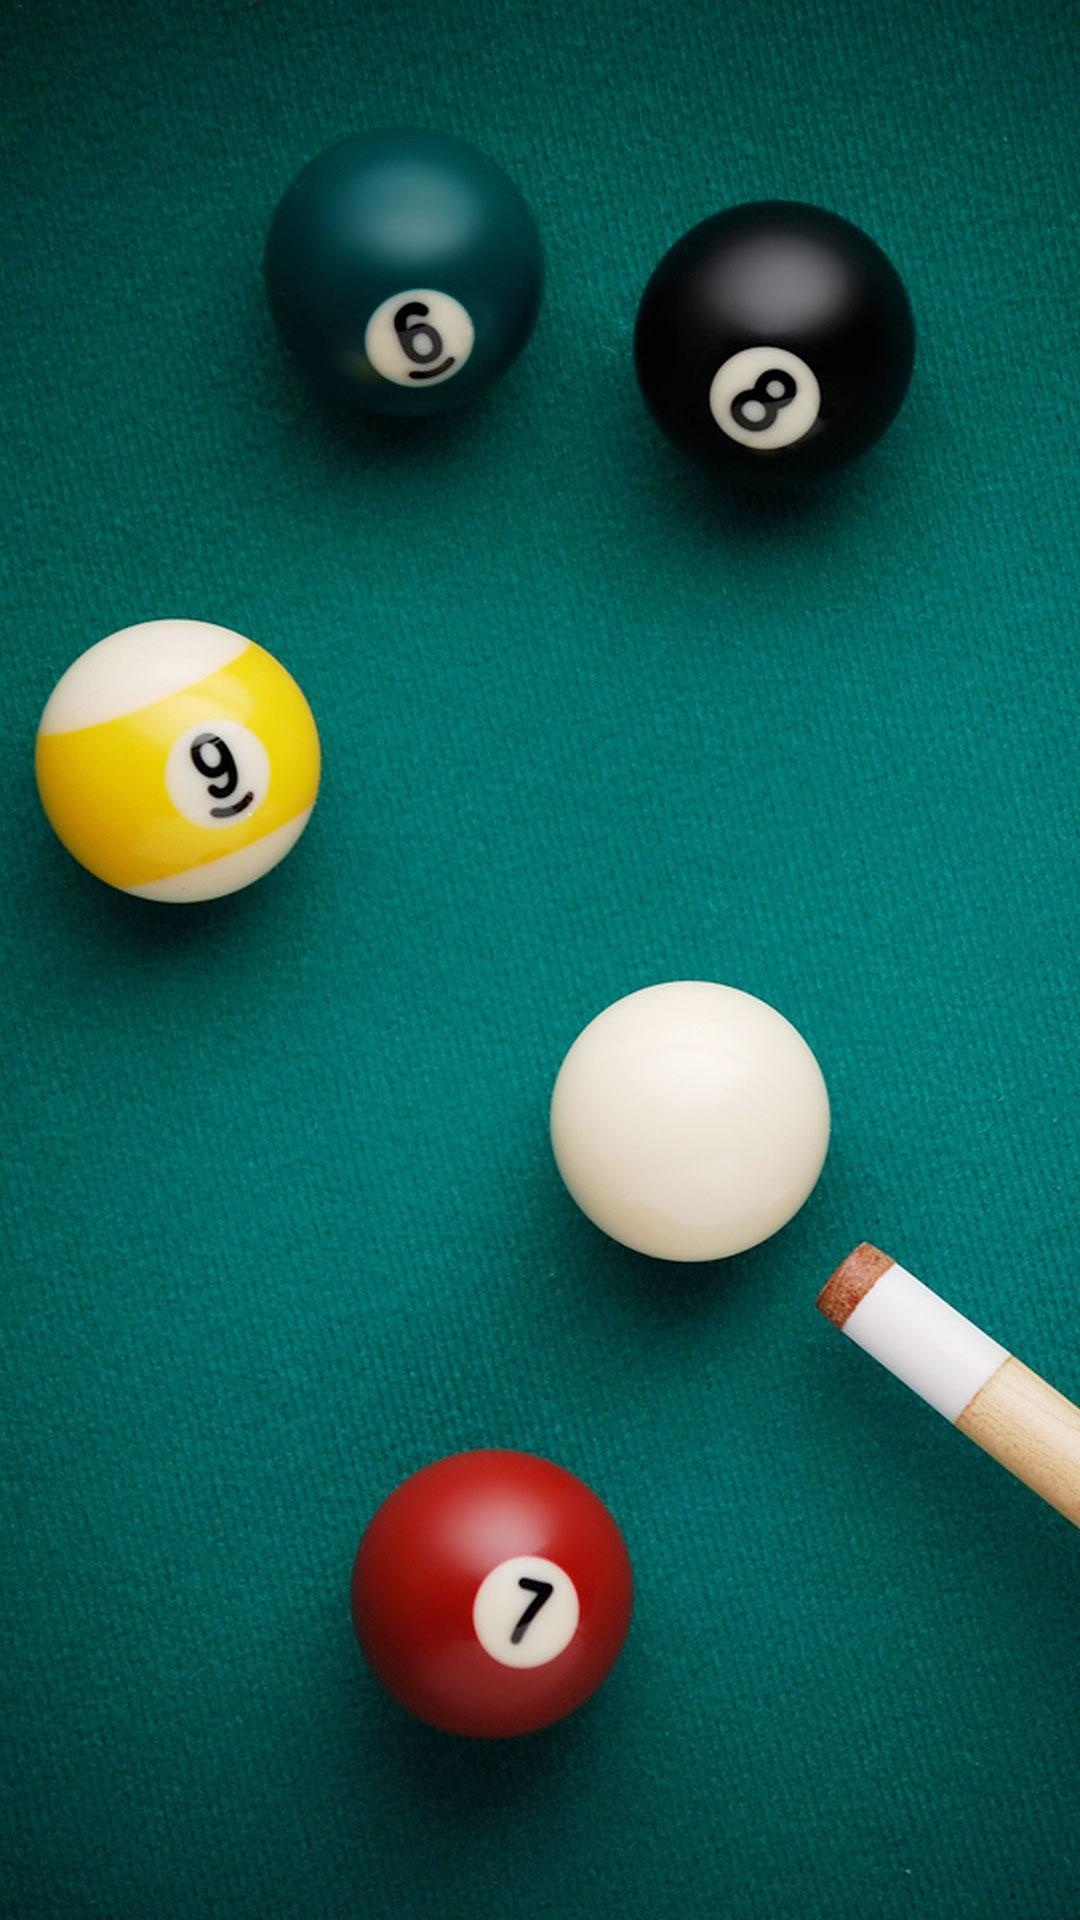 Billiards: A game of skill played with a cue, which is used to strike object balls. 1080x1920 Full HD Wallpaper.